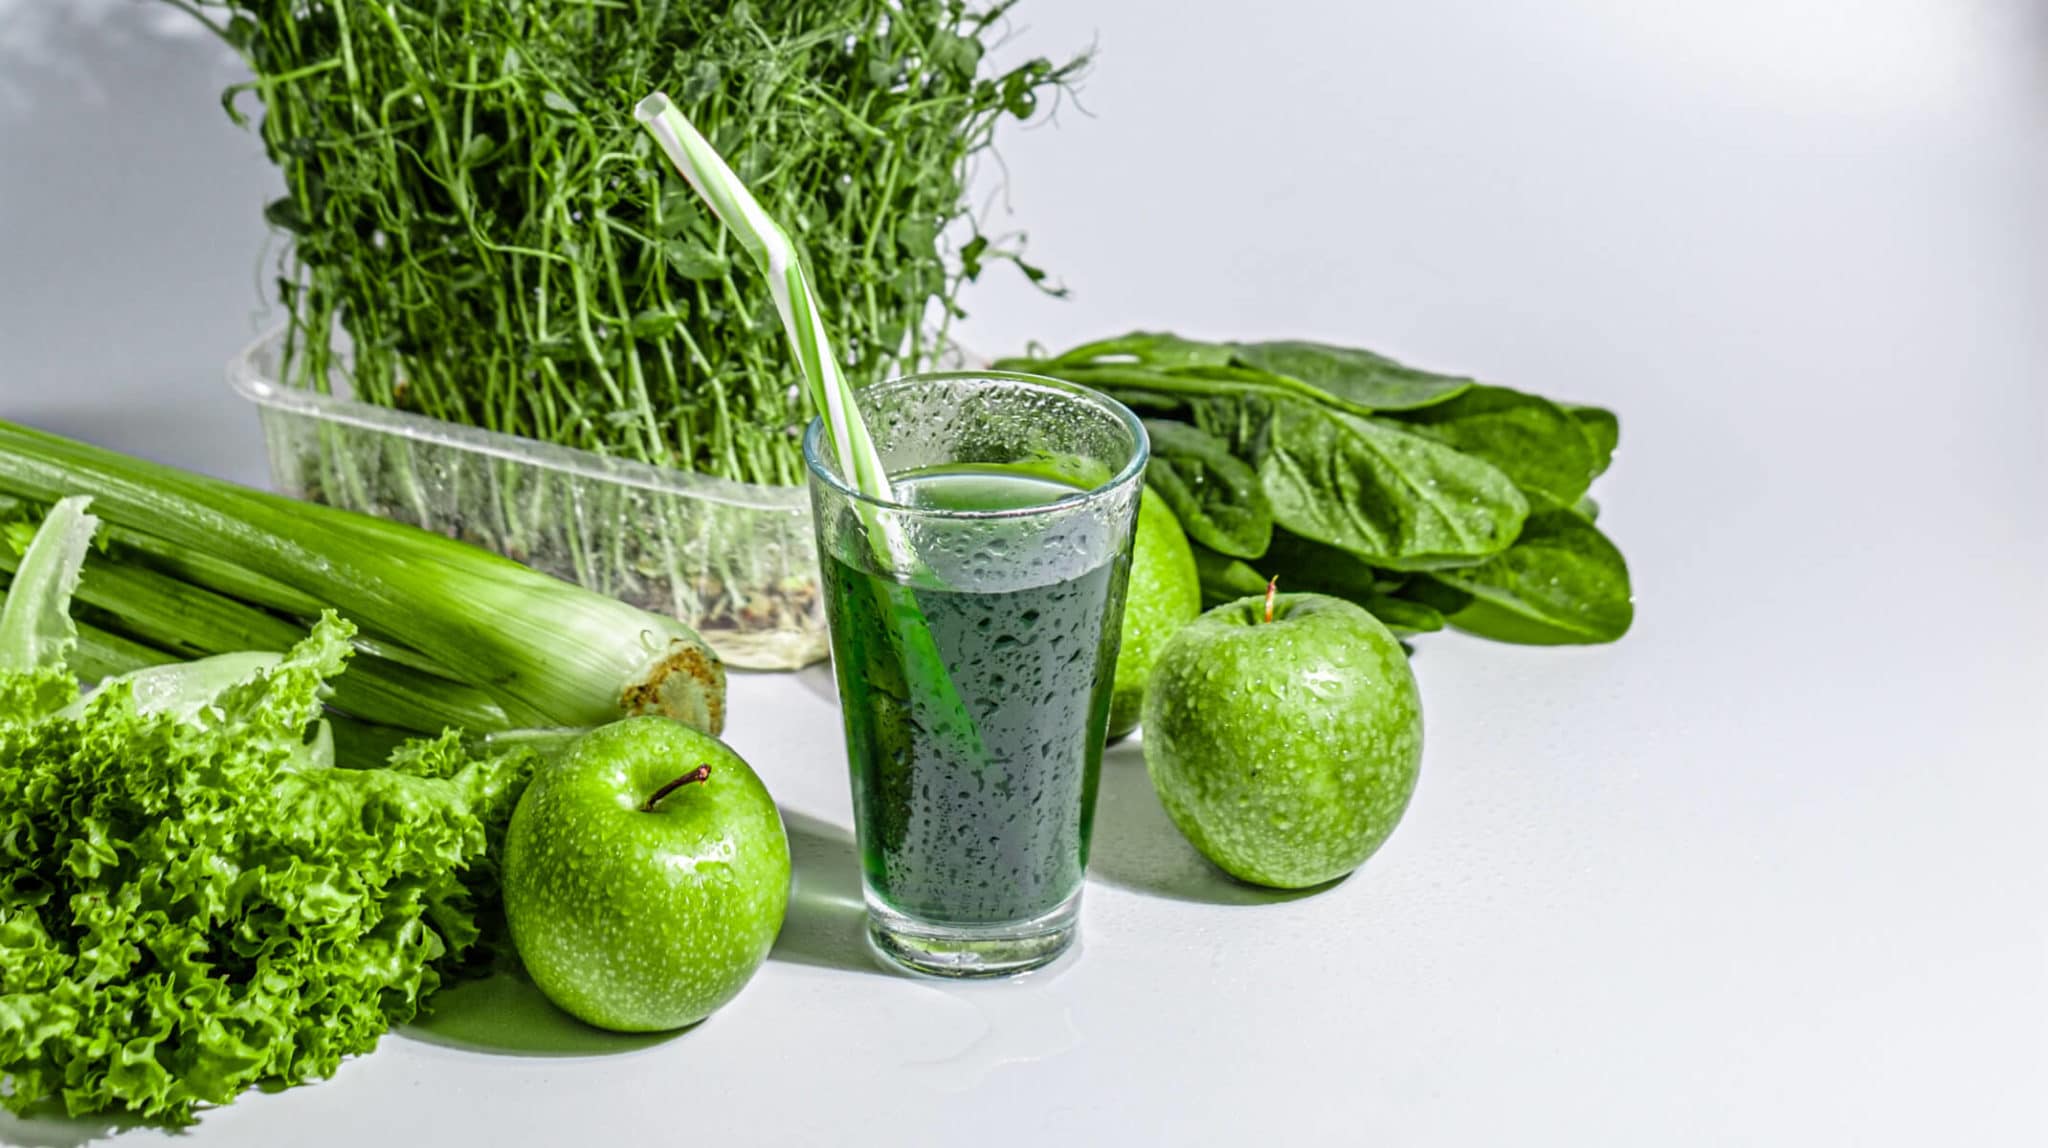 BENEFITS OF LIQUID CHLOROPHYLL AND CHLOROPHYLL WATER